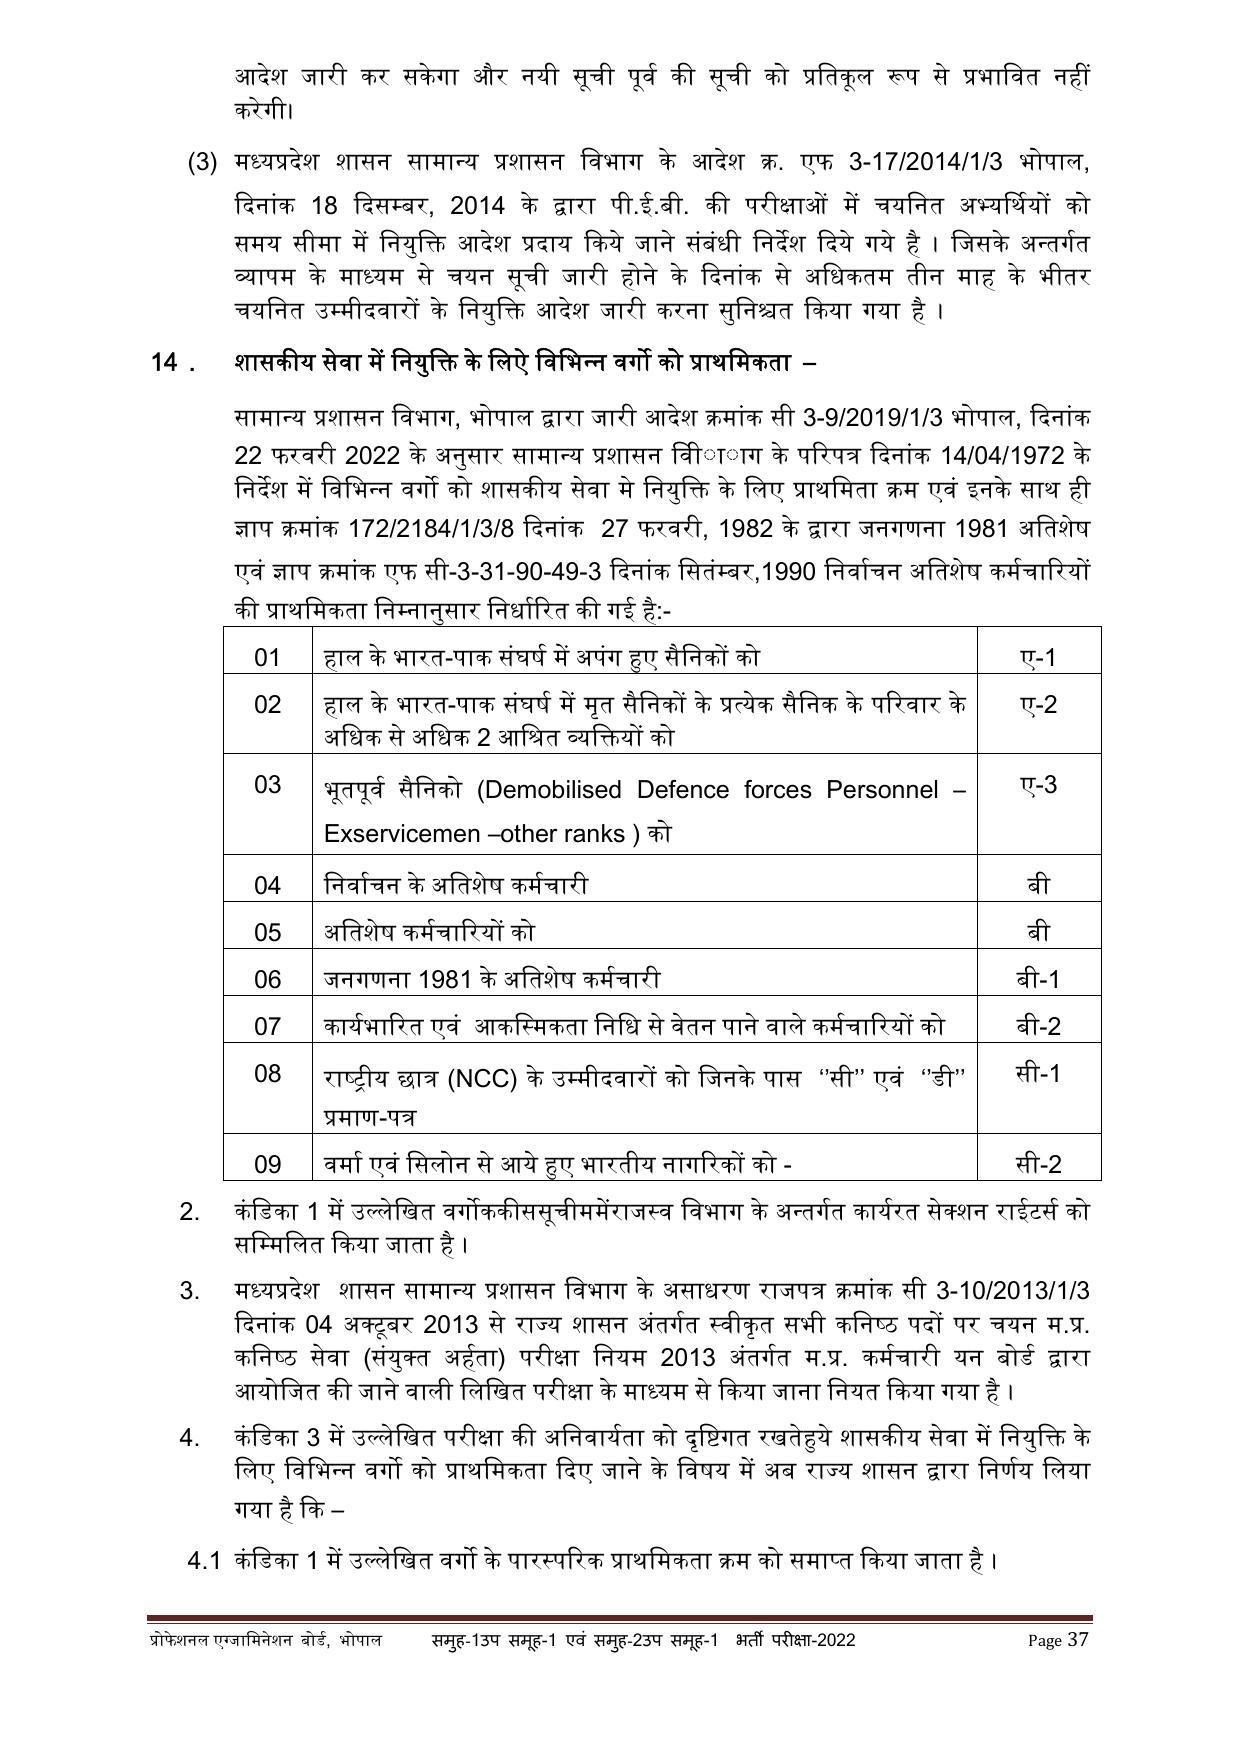 MPPEB Group-I Sub Group-I & Group-II Sub Group-I Recruitment 2022 - Page 23